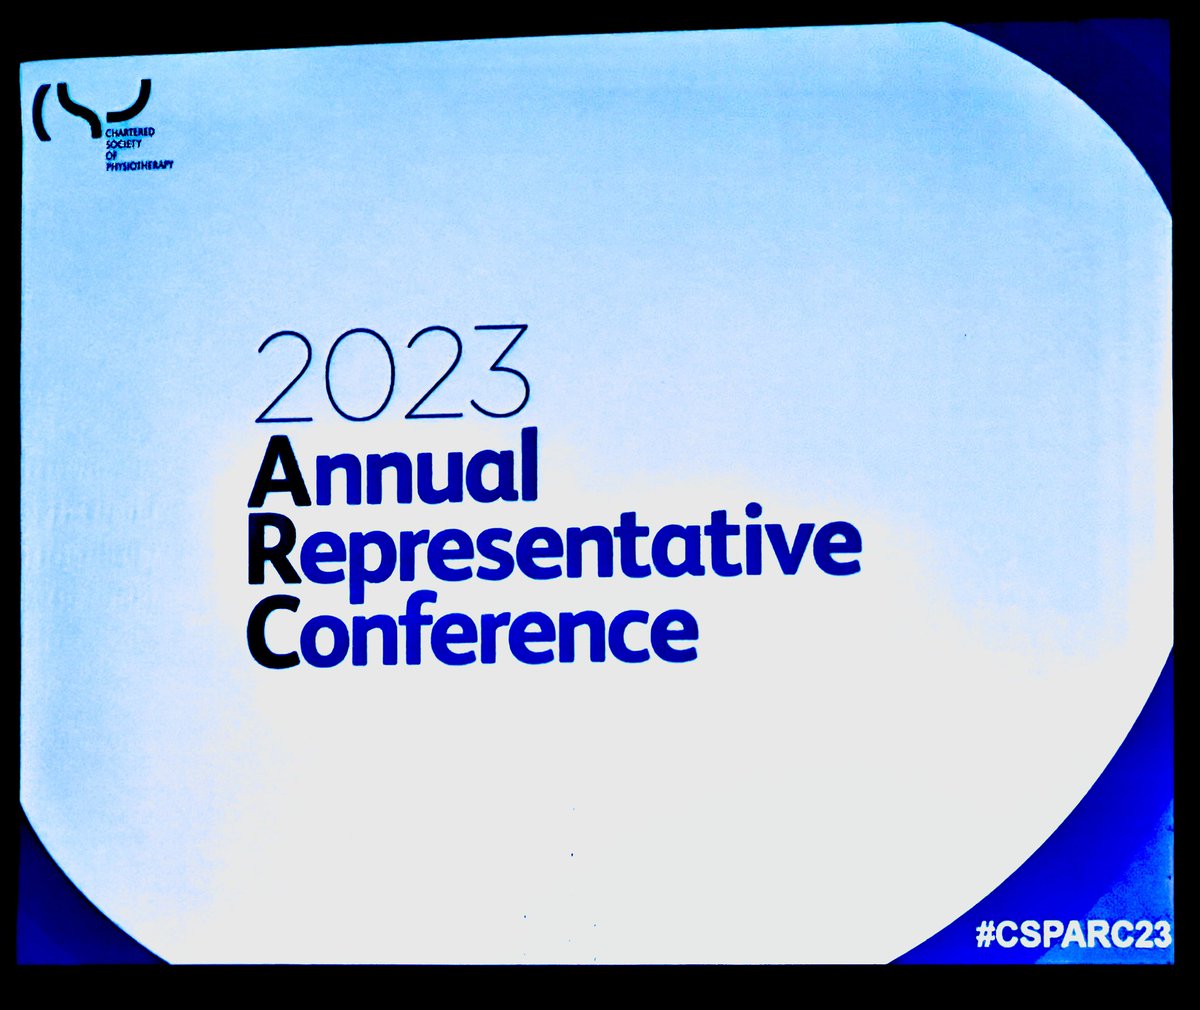 My first ARC attendance today - very much looking forward to listening, voting and learning lots #CSPARC23